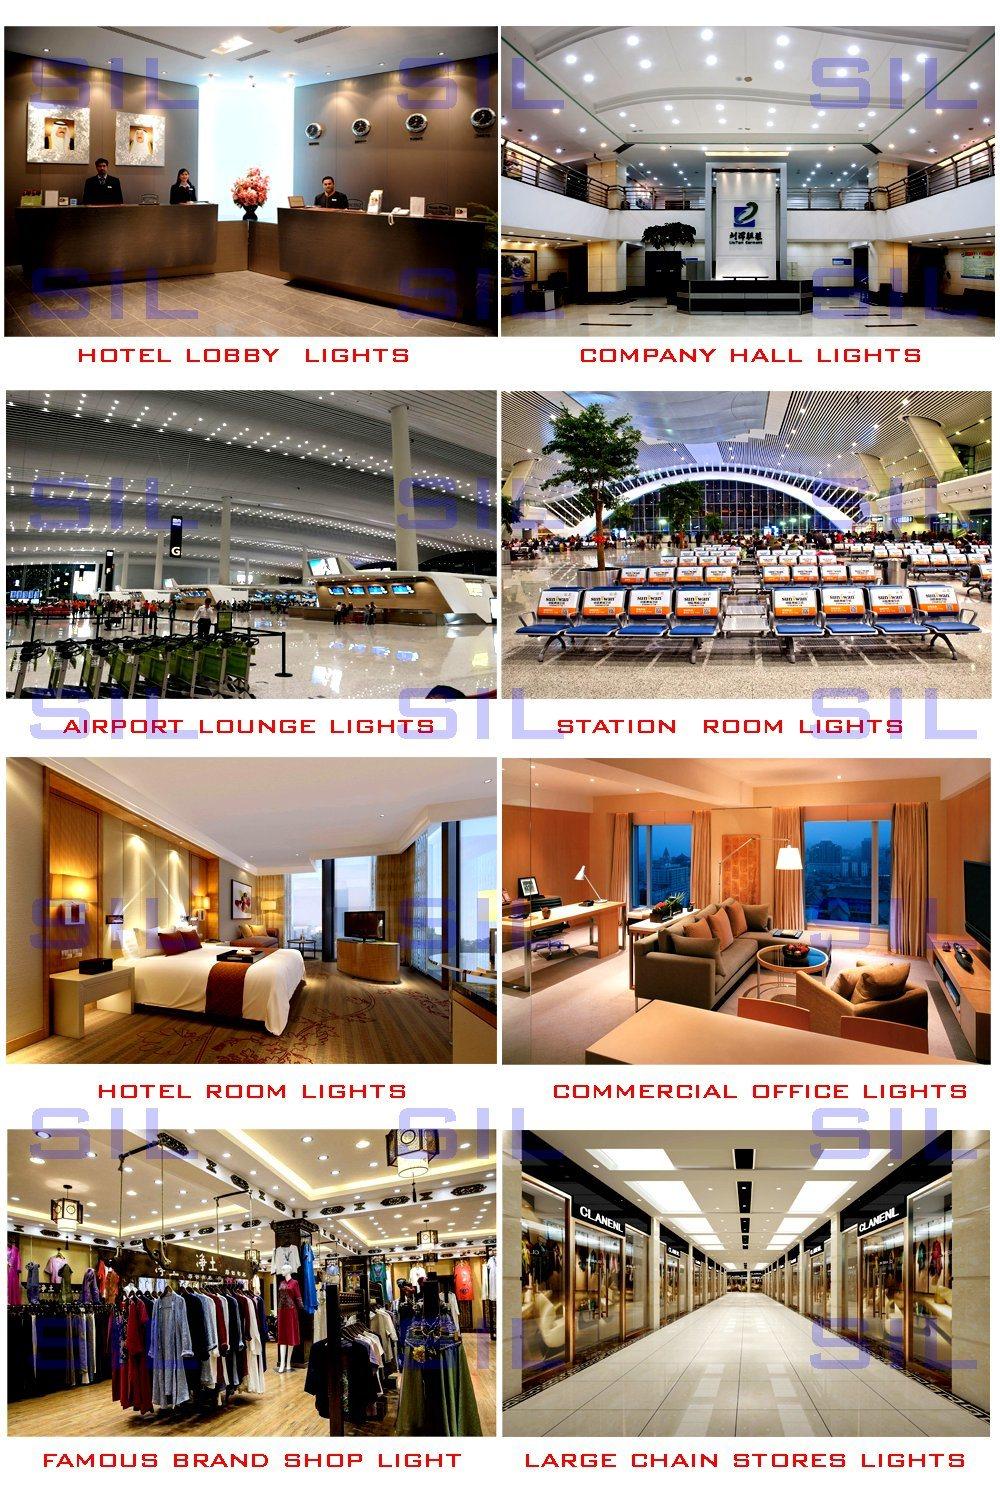 Supplier Best Price Portable LED Downlight with Good Quality Recessed Fixture 30W LED Down Light